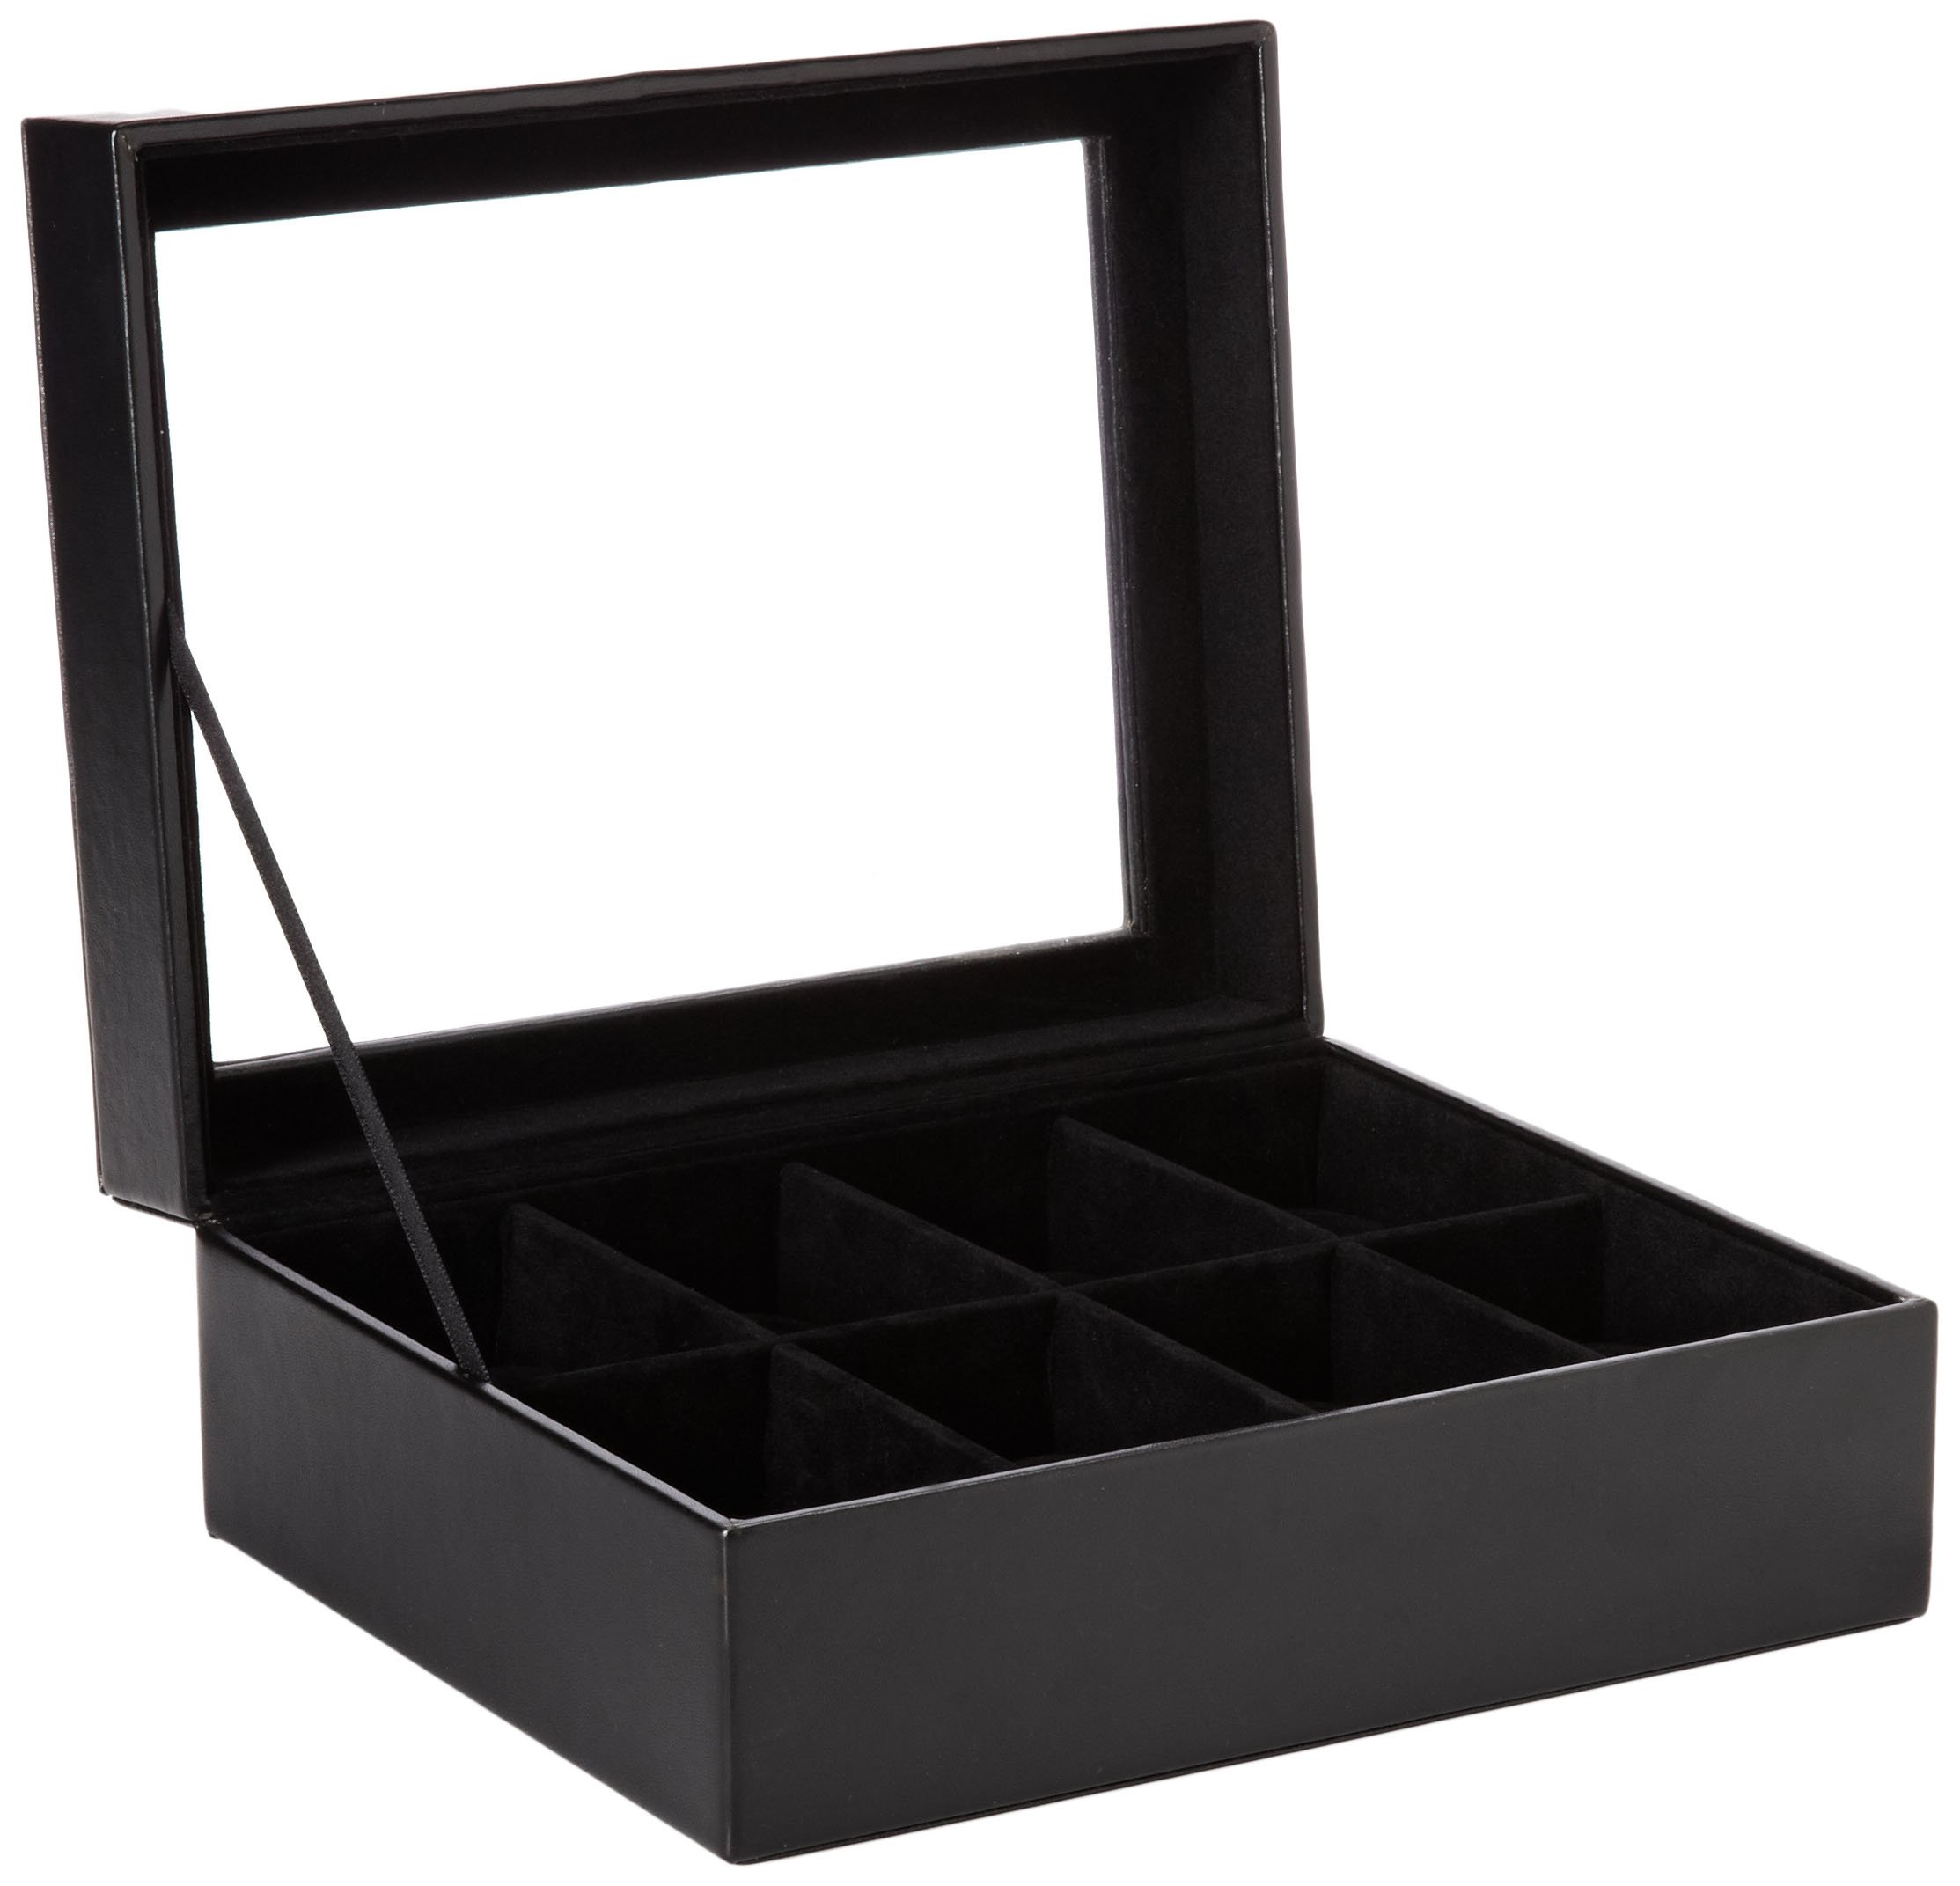 WOLF 99513 Heritage 8 Piece Watch Box with Glass Cover, Black